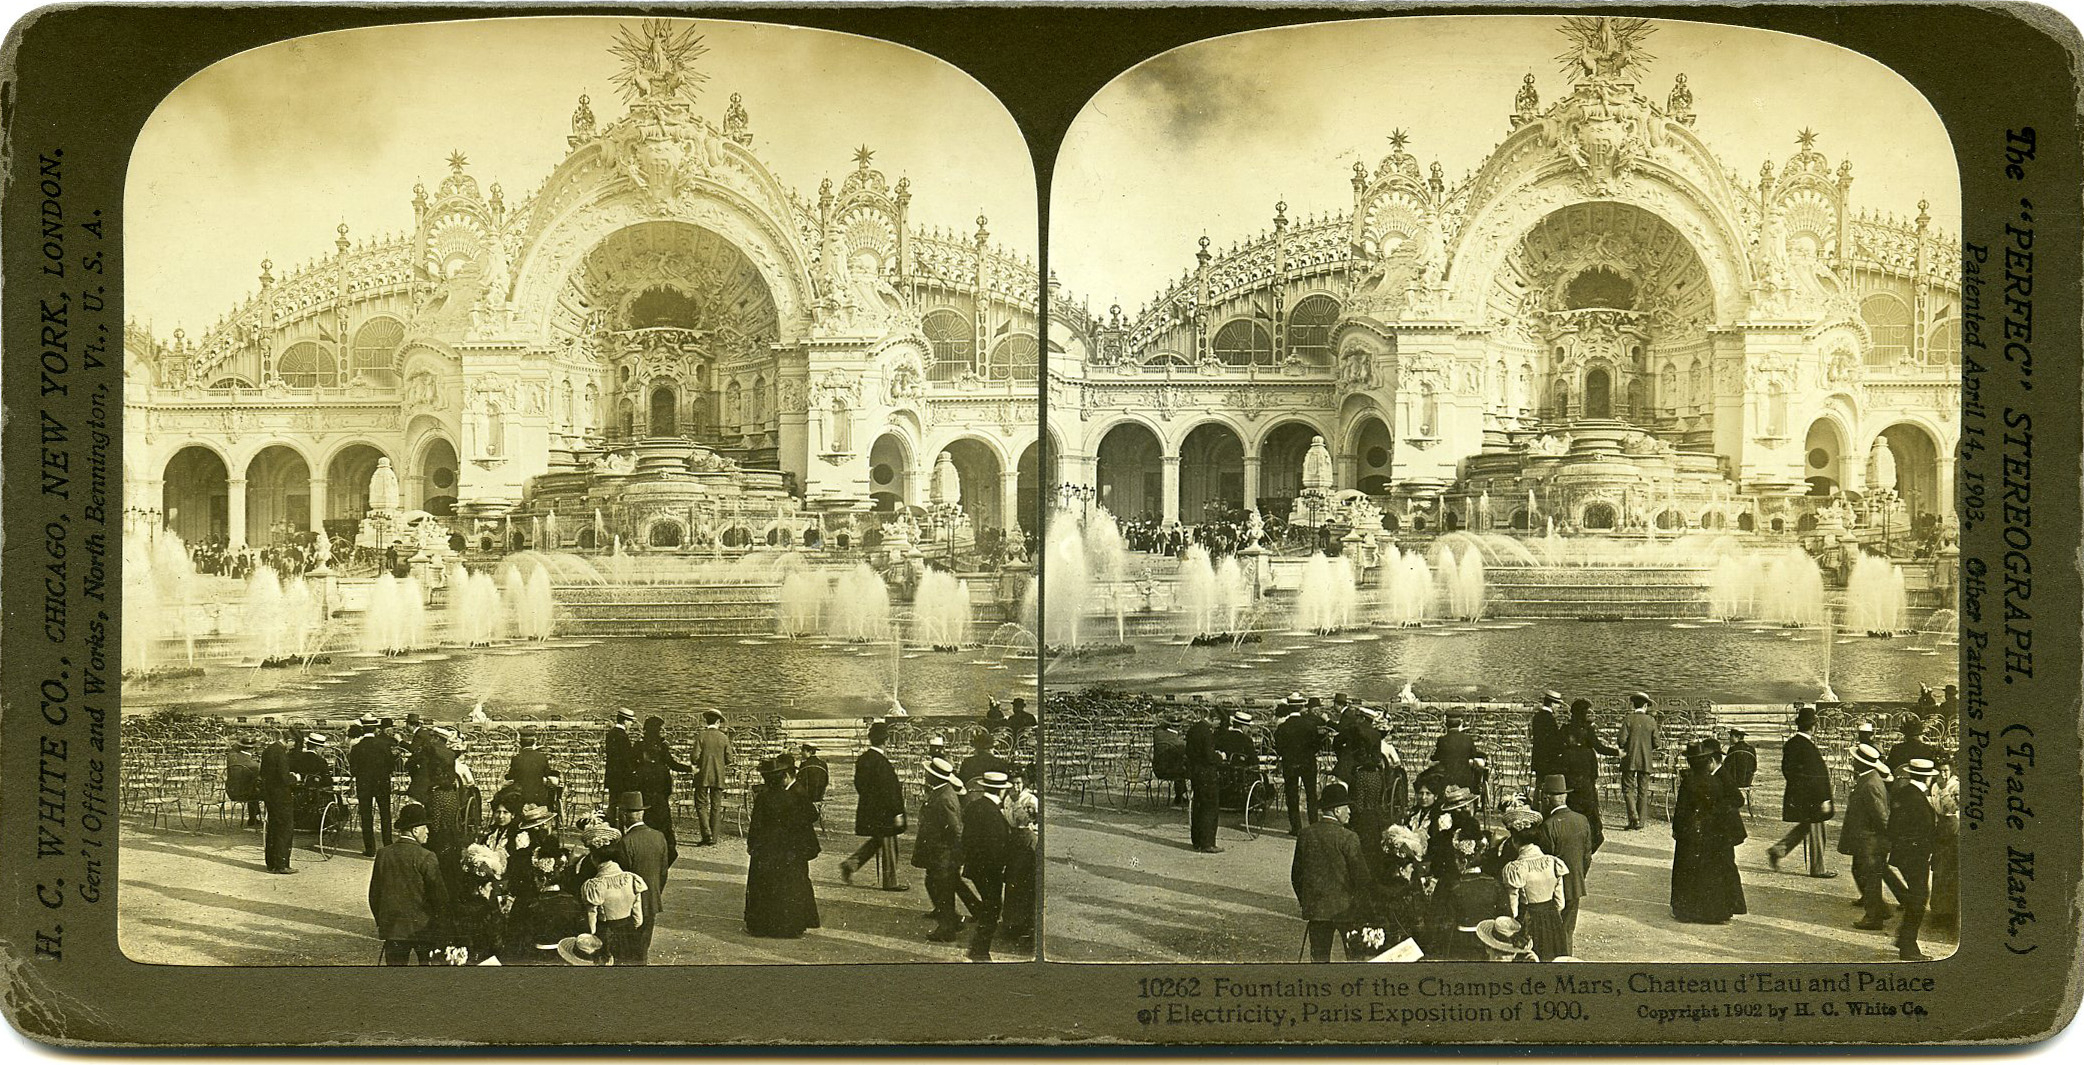 The subject of the Stereoscopic picture is the palace, in front of which the sources of shower.